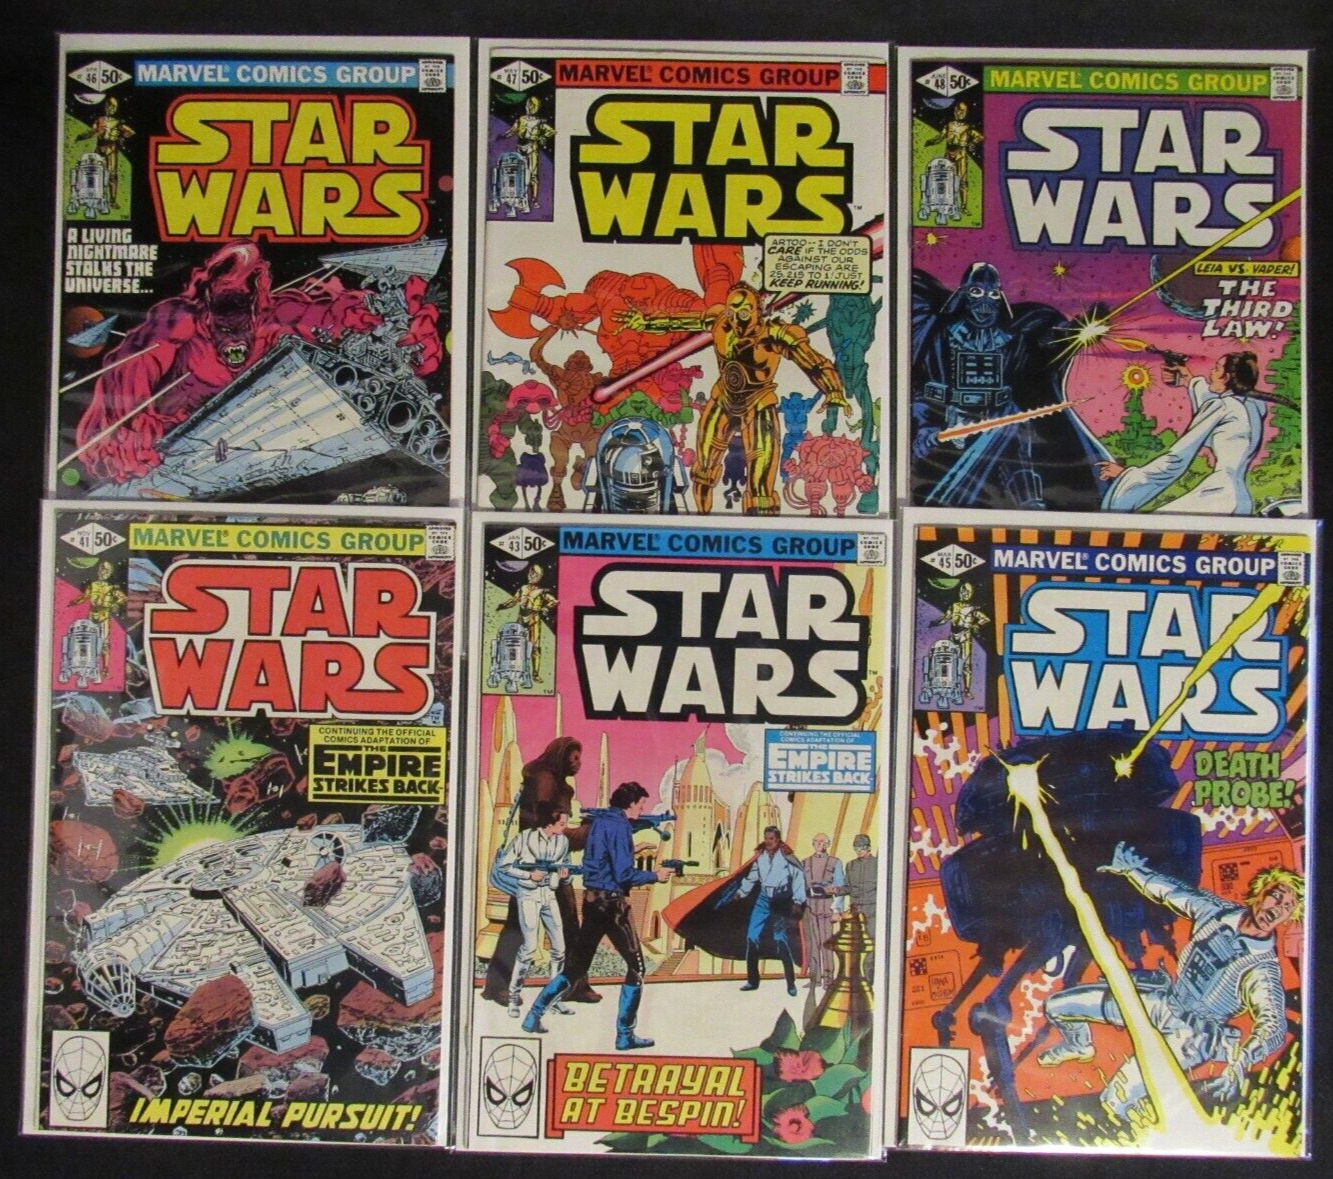 Star Wars (1977, Marvel) Lot #41, 43, 45, 46, 47, 48 FN to VF PX833